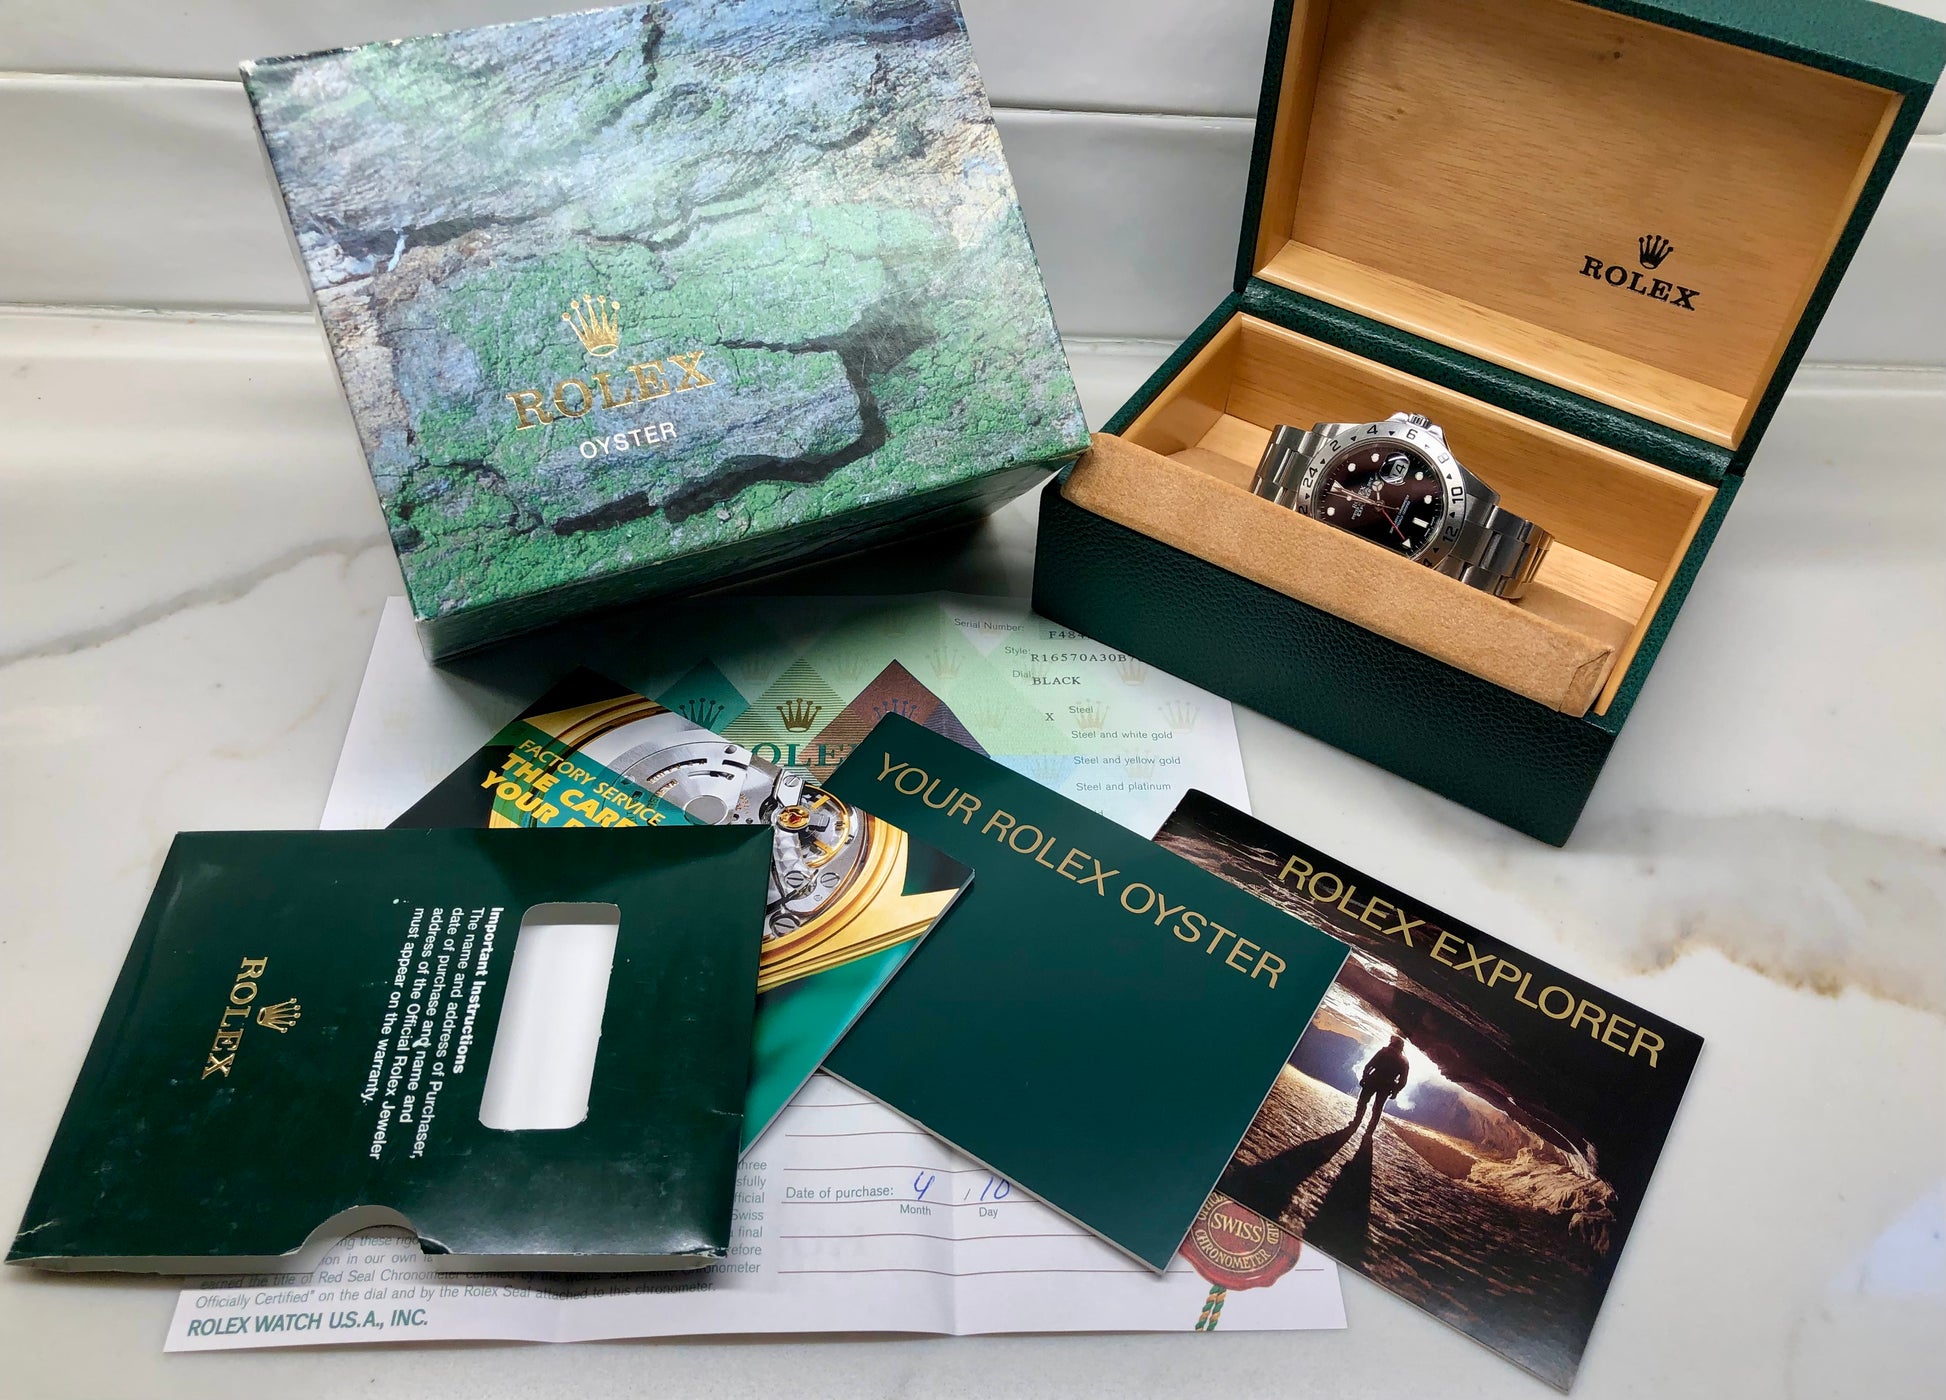 2005 Rolex Explorer II 16570 Black Dial Steel Oyster Wristwatch with Box and Papers - Hashtag Watch Company